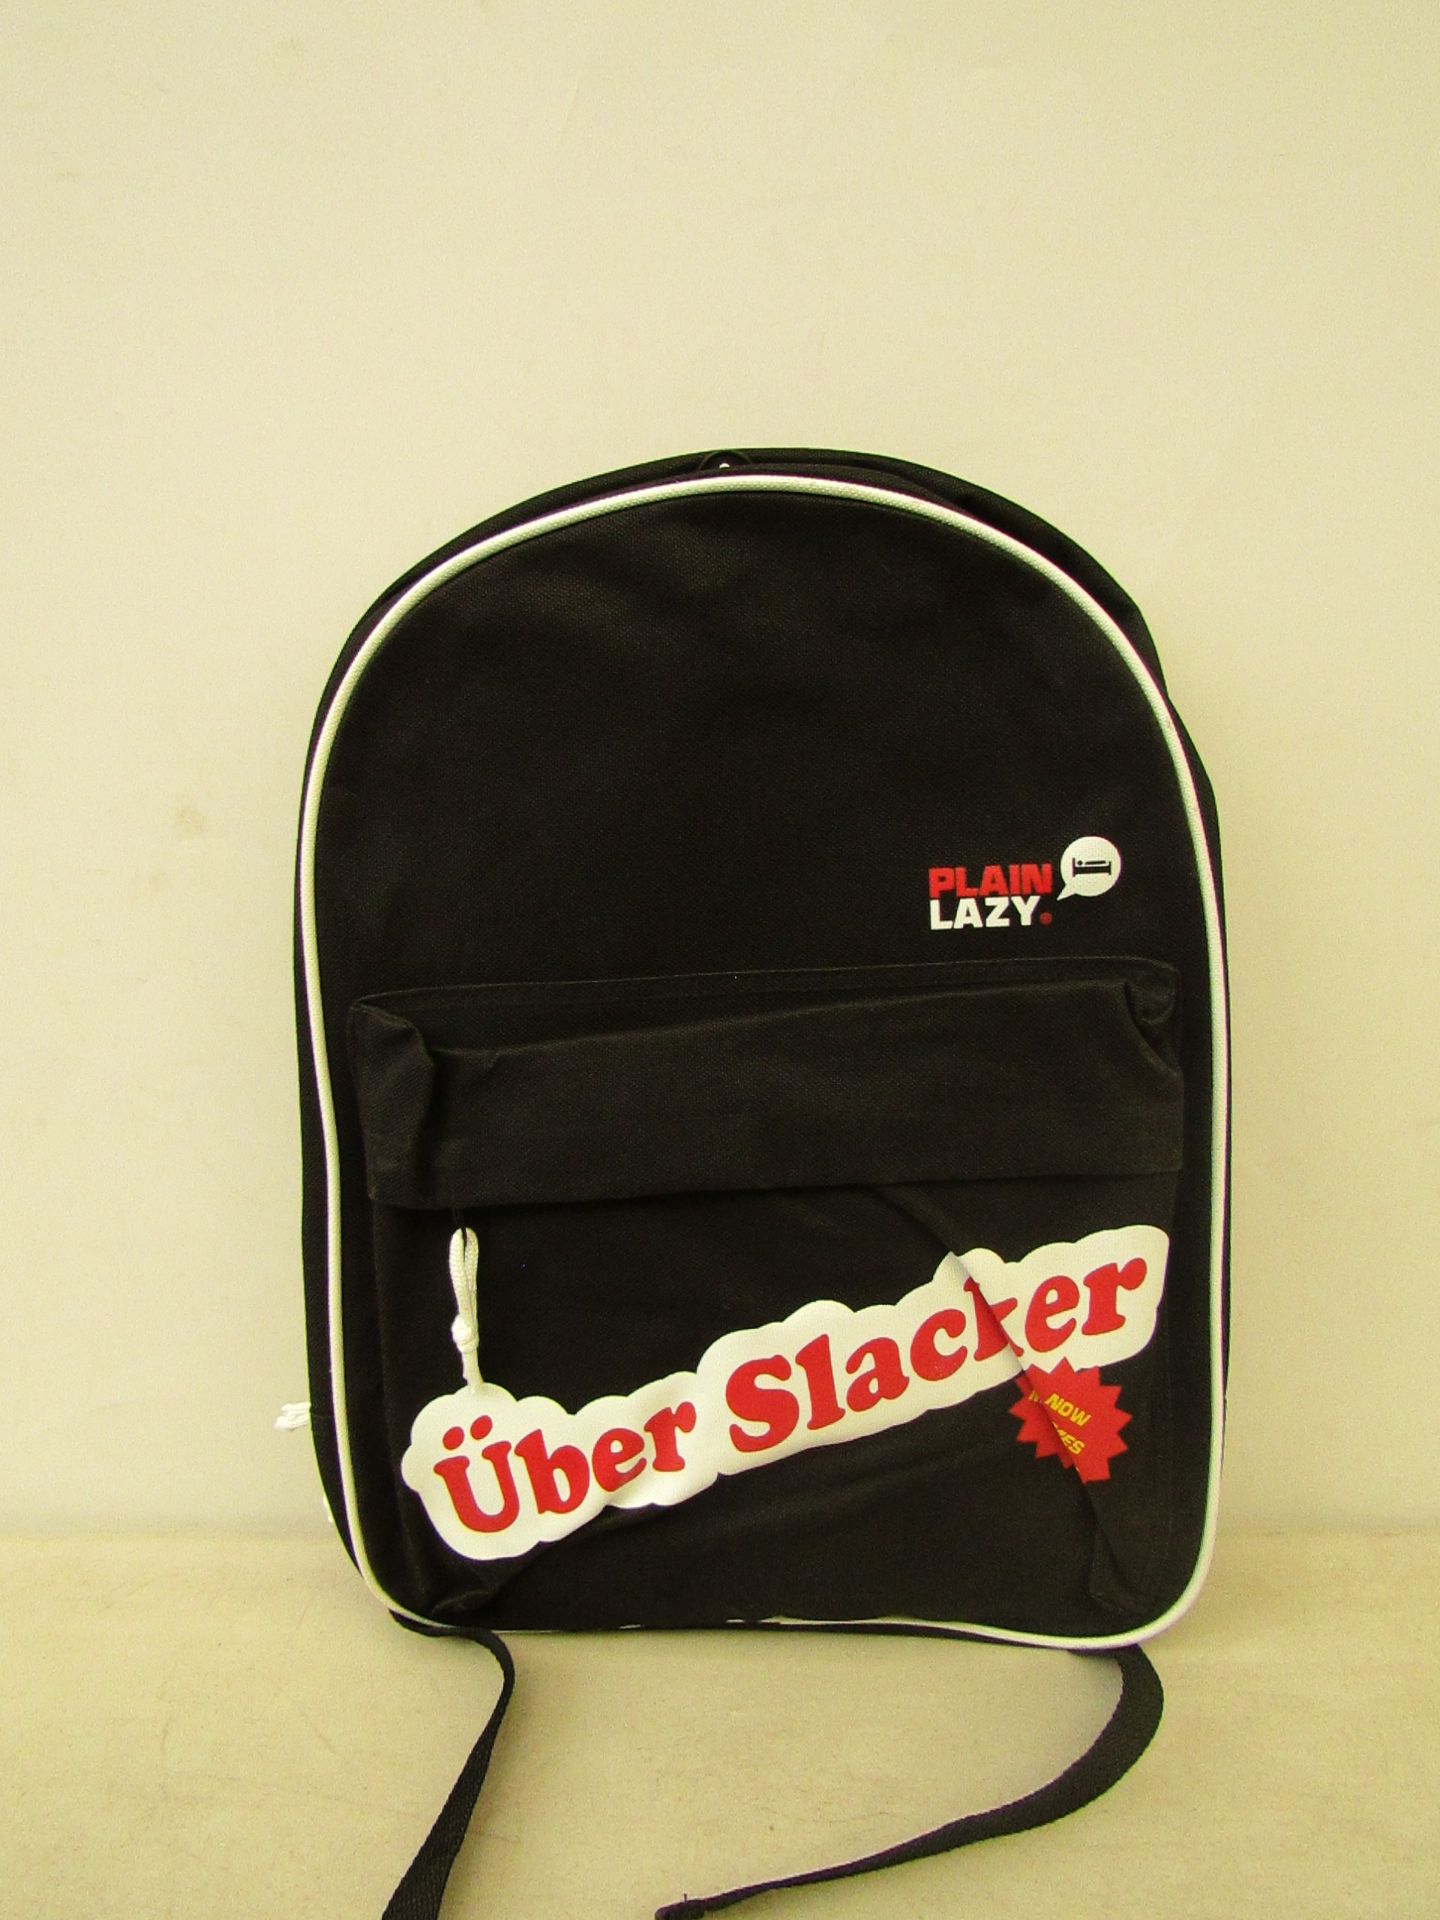 Uber slacker back pack, new with tags in packaging.